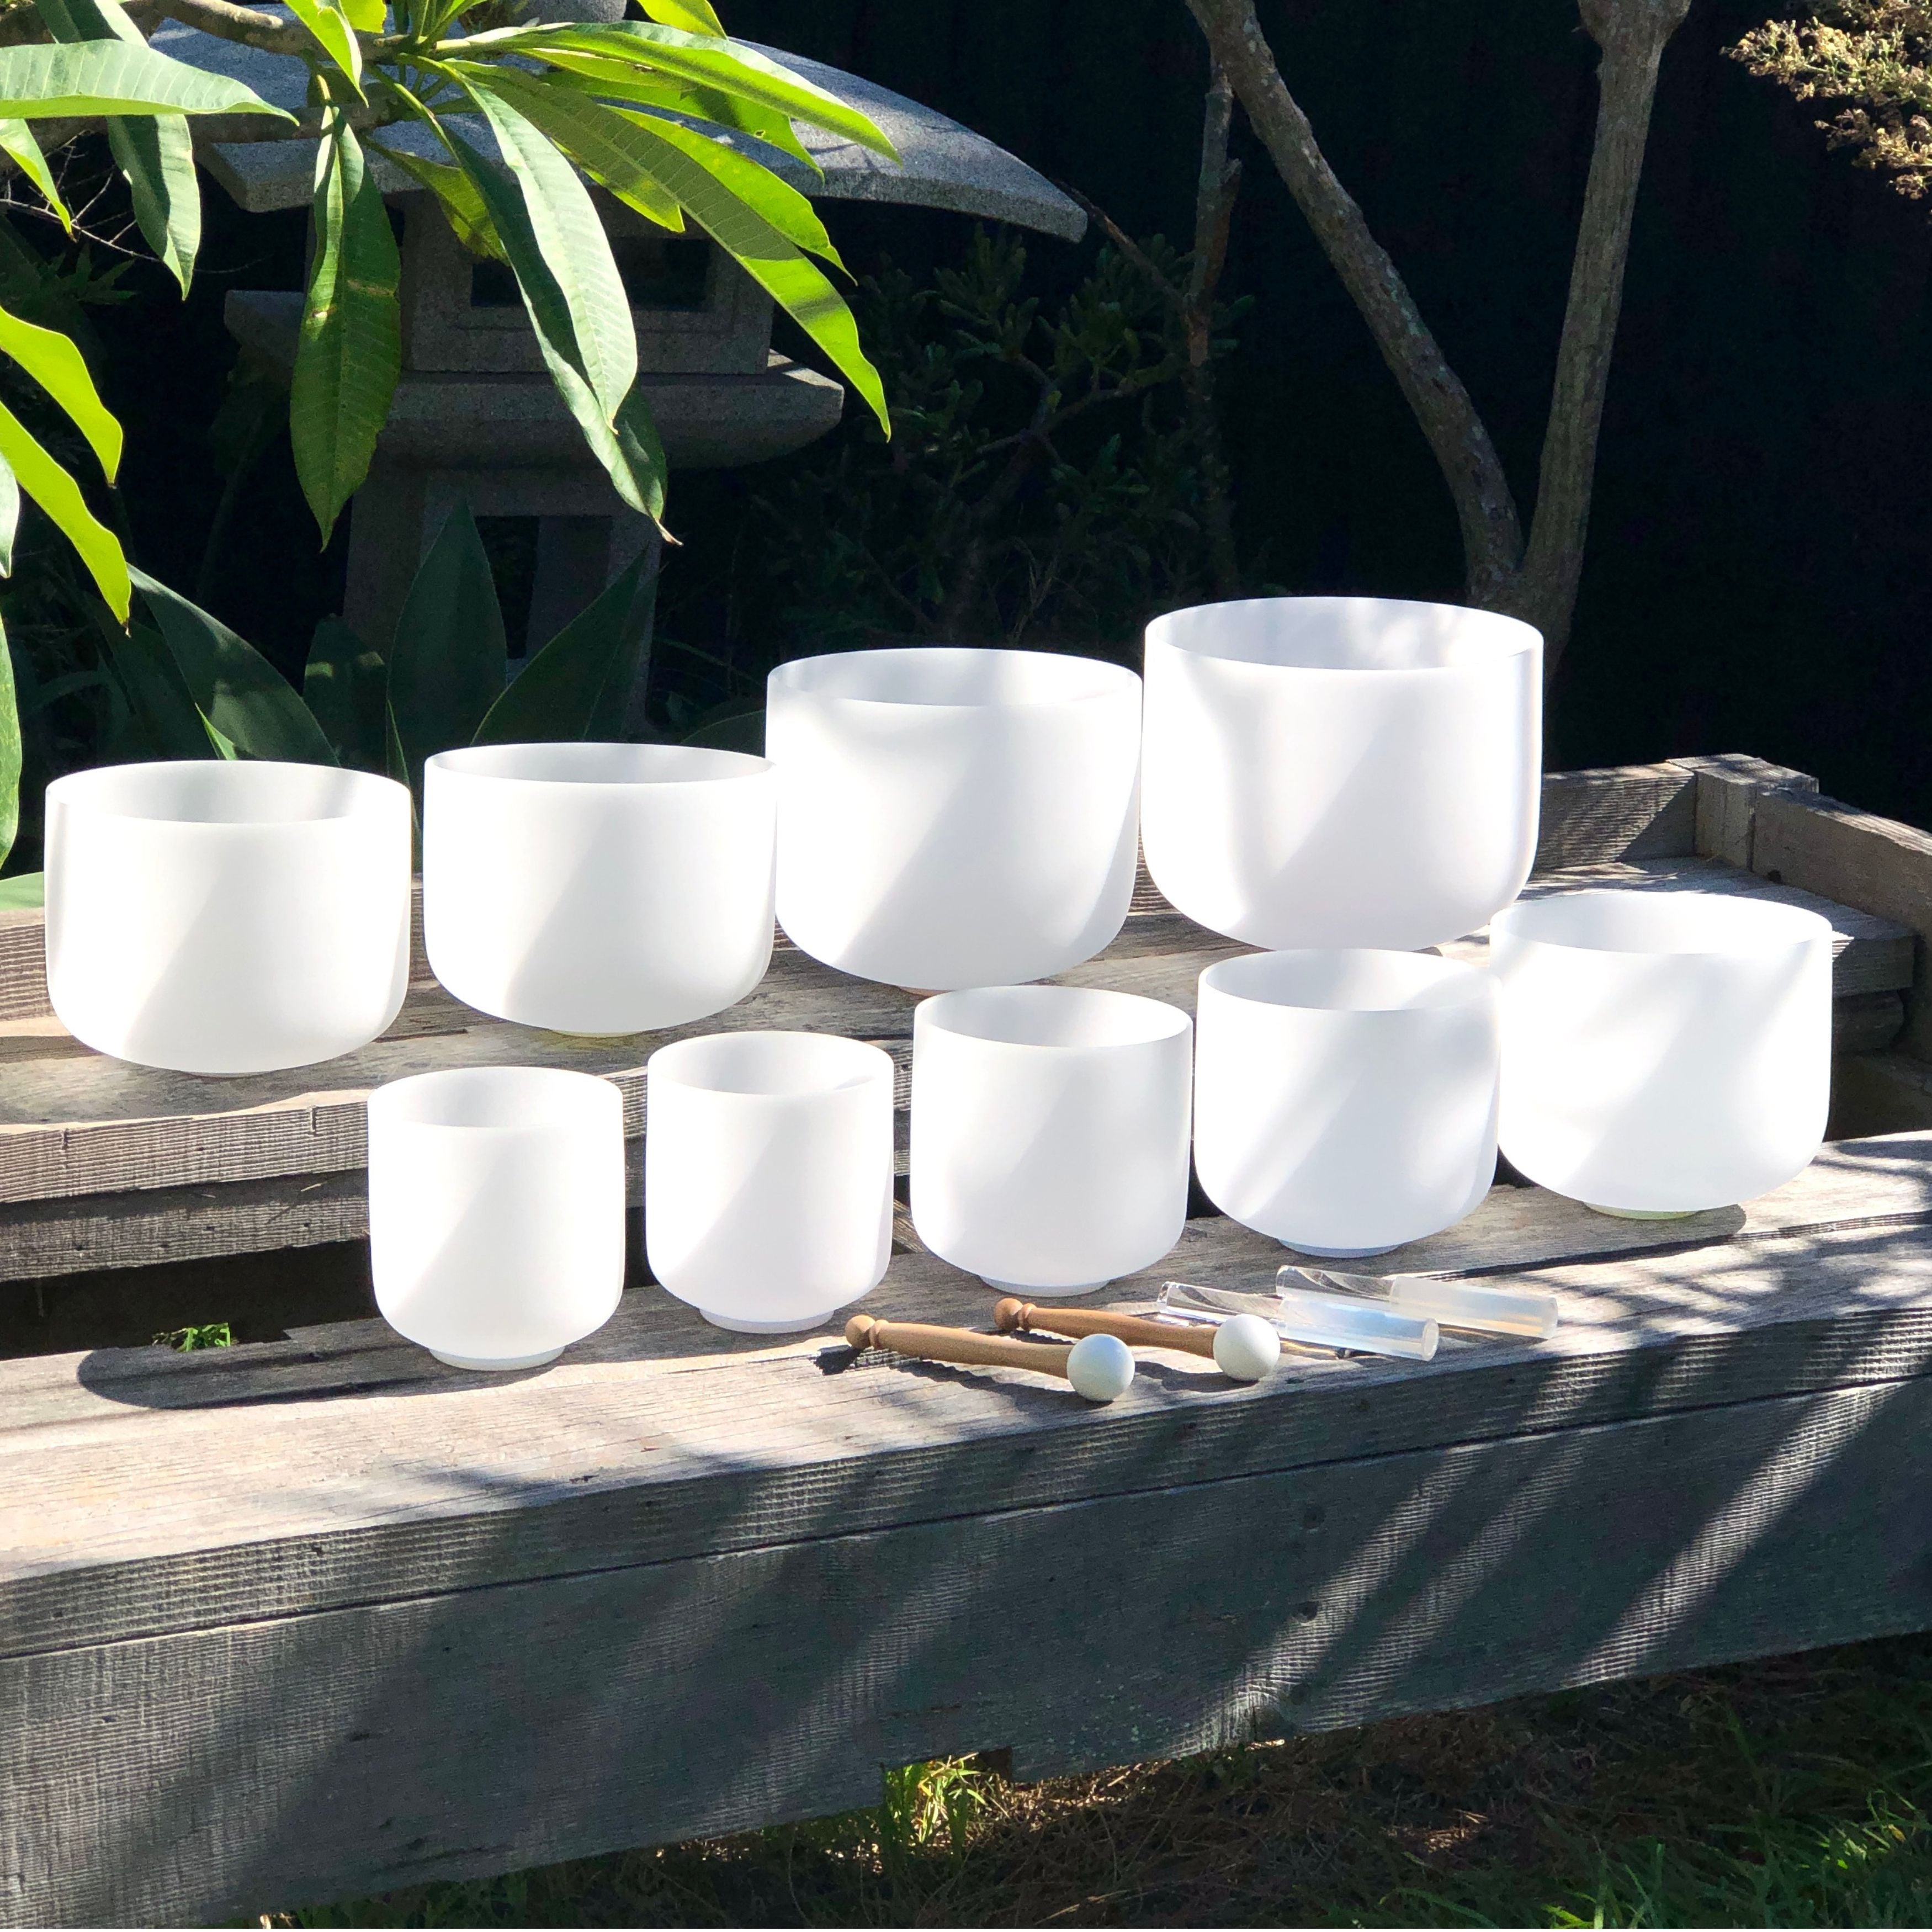 Full Chakra︱Set of 9 White Crystal Singing Bowls in Beige Bags